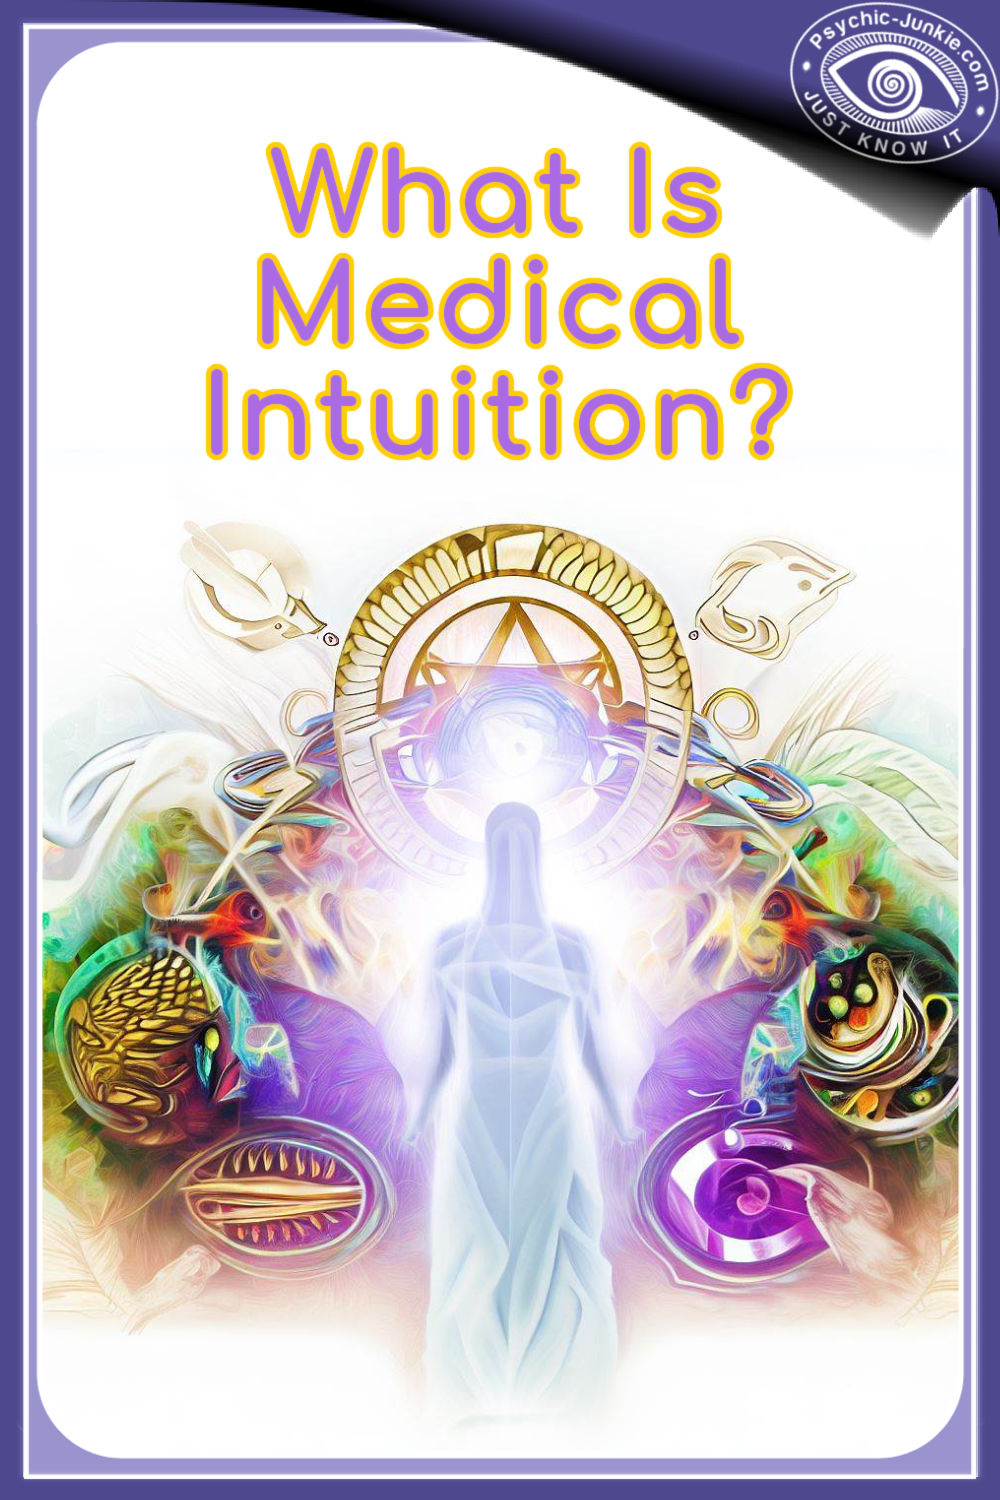 What Is A Medical Intuitive?